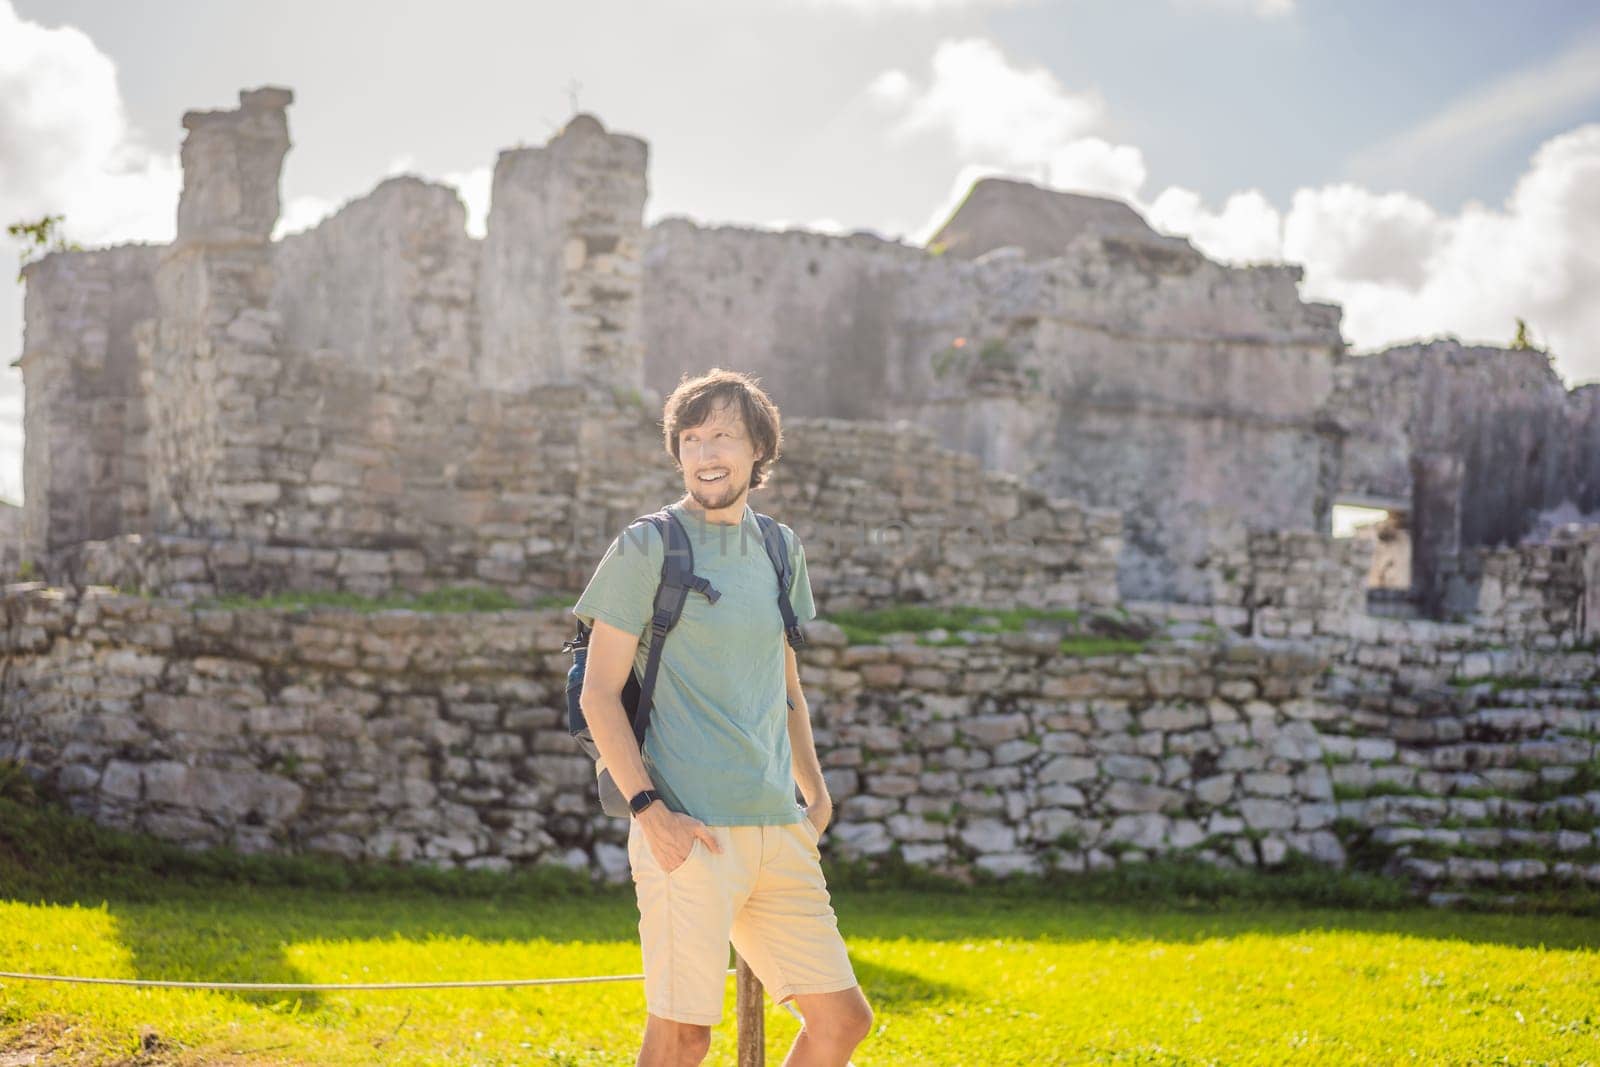 Male tourist enjoying the view Pre-Columbian Mayan walled city of Tulum, Quintana Roo, Mexico, North America, Tulum, Mexico. El Castillo - castle the Mayan city of Tulum main temple by galitskaya